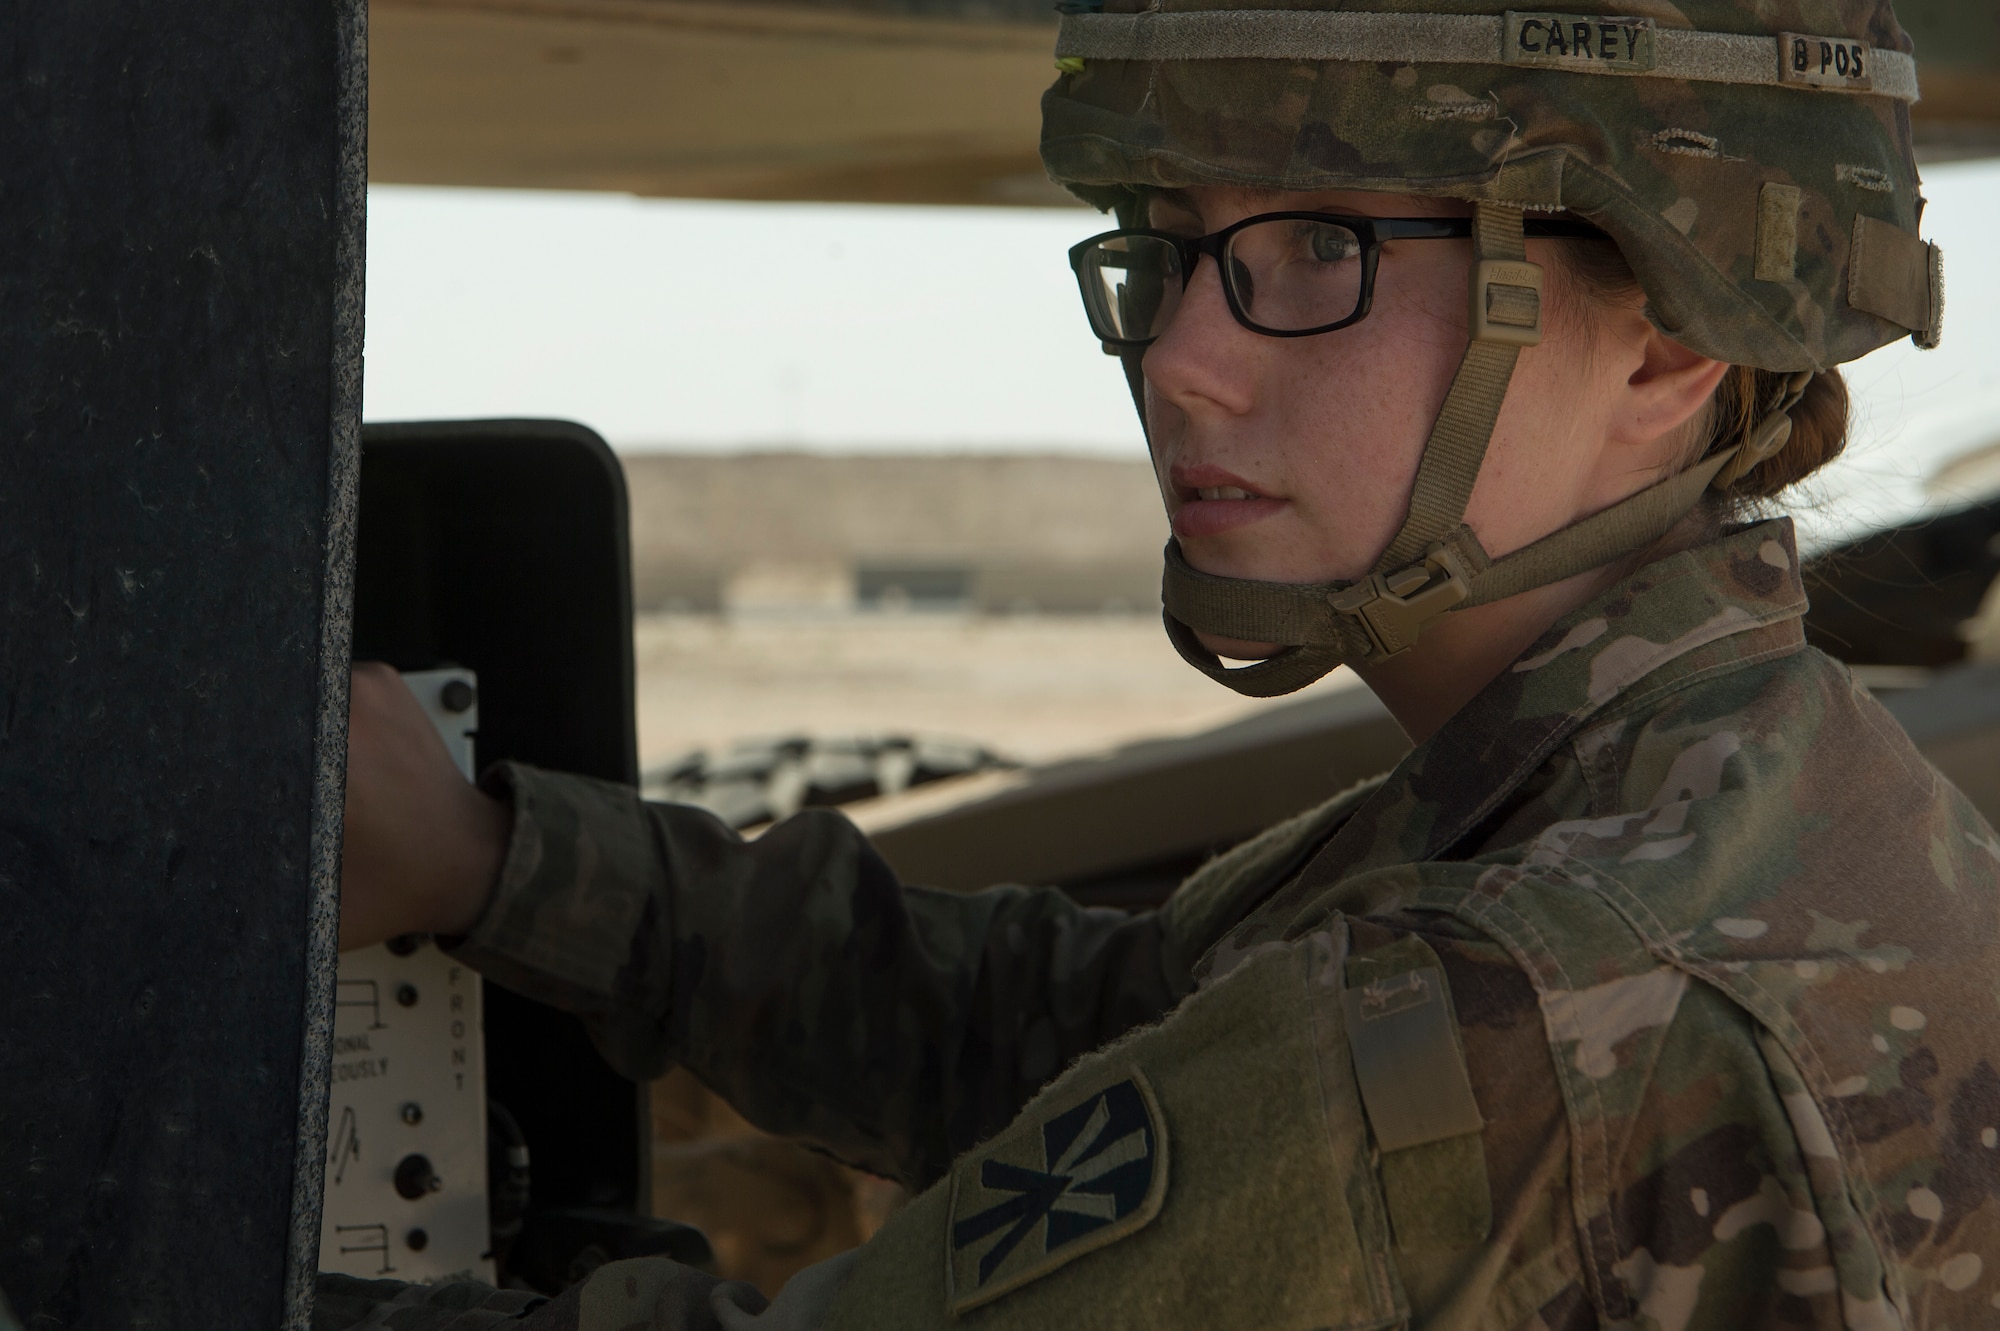 U.S. Army Pfc. Abbigail Carey, Charlie Company, 1st Battalion, 43rd Air Defense Artillery (ADA) Battalion, 11th ADA Brigade patriot missile maintainer and operator, performs patriot missile readiness drills at Al Udeid Air Base, Qatar, April 16, 2019. Soldiers of the 1-43rd ADA Battalion maintain and control the installation’s Patriot missile launchers in support of personnel and operations at Al Udeid. (U.S. Air Force photo by Tech. Sgt. Christopher Hubenthal)